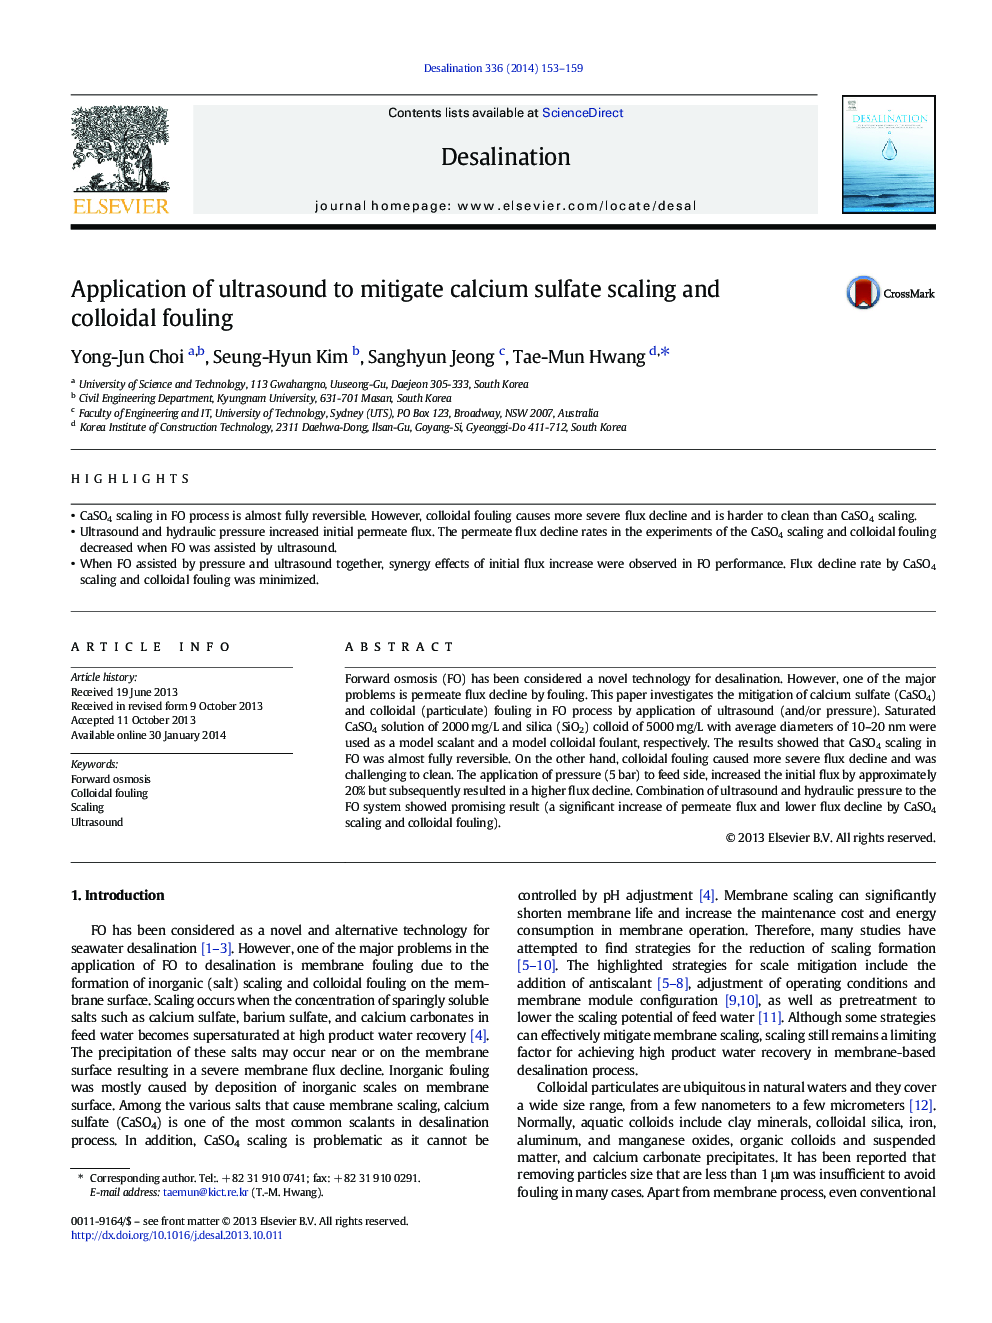 Application of ultrasound to mitigate calcium sulfate scaling and colloidal fouling